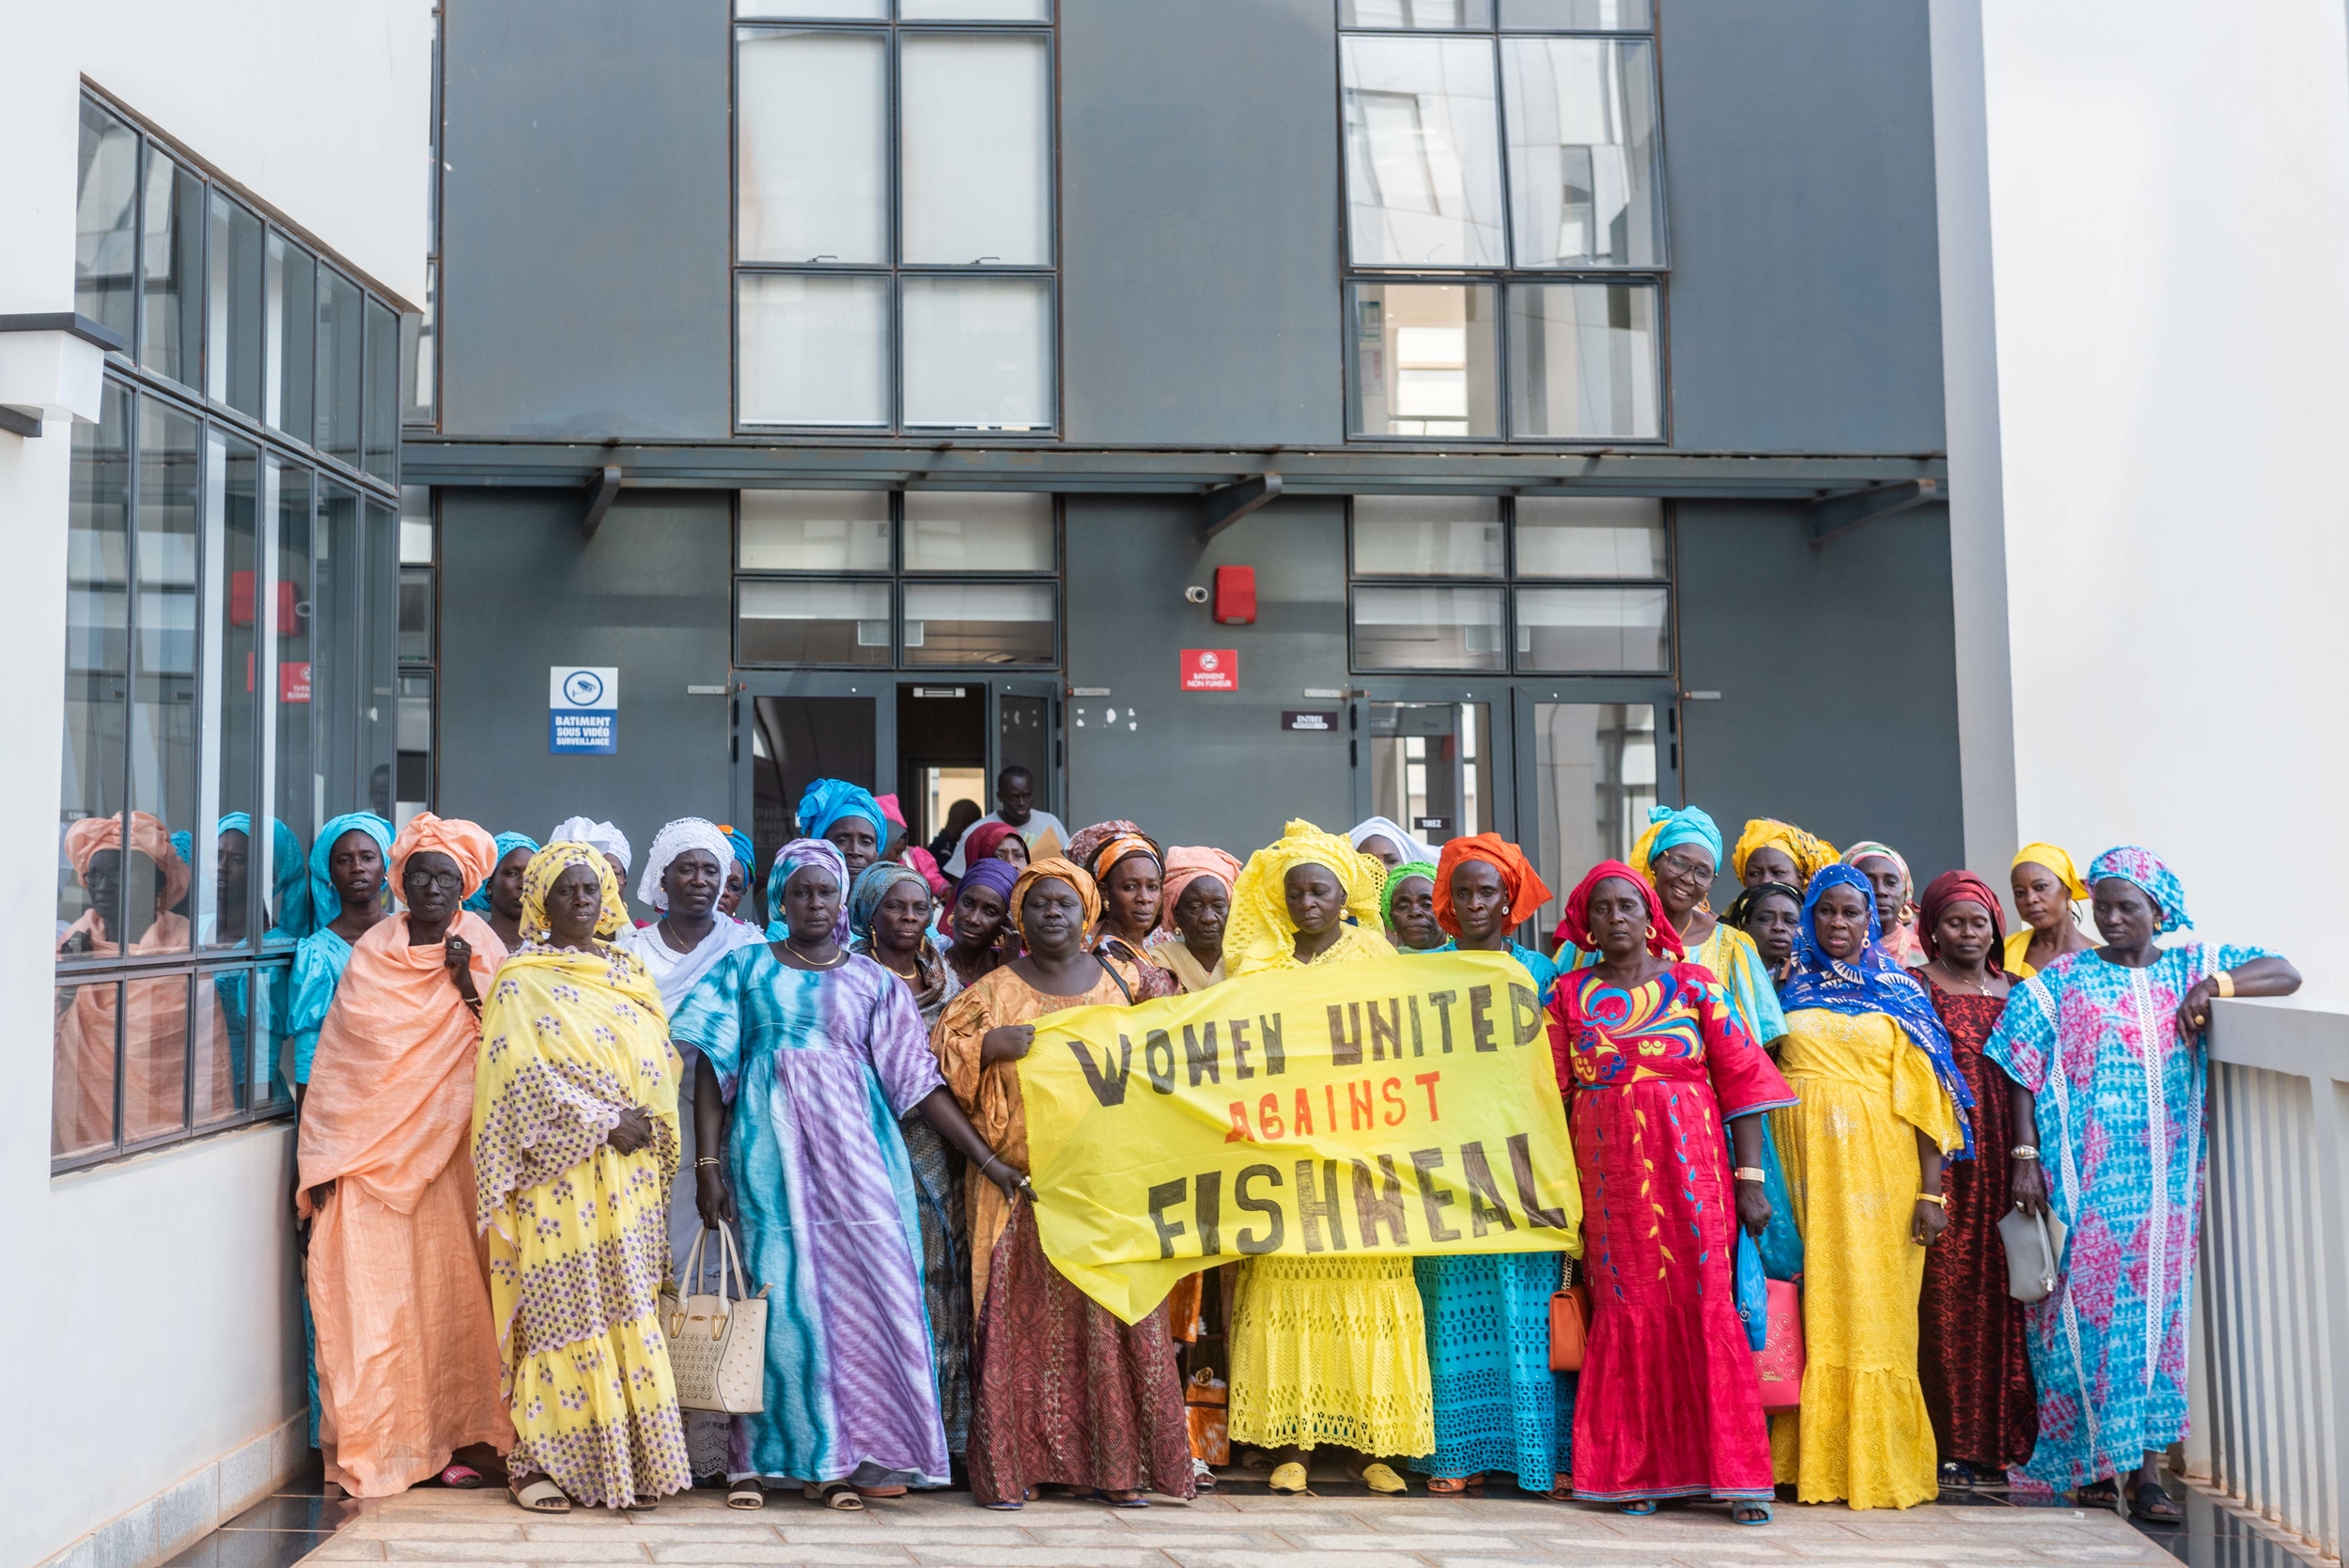 Around 30 Black women in long, colourful dresses and matching headscarves stand close together facing the camera. At the front of the group, one holds a hand-painted banner reading 'Women united against fishmeal'.